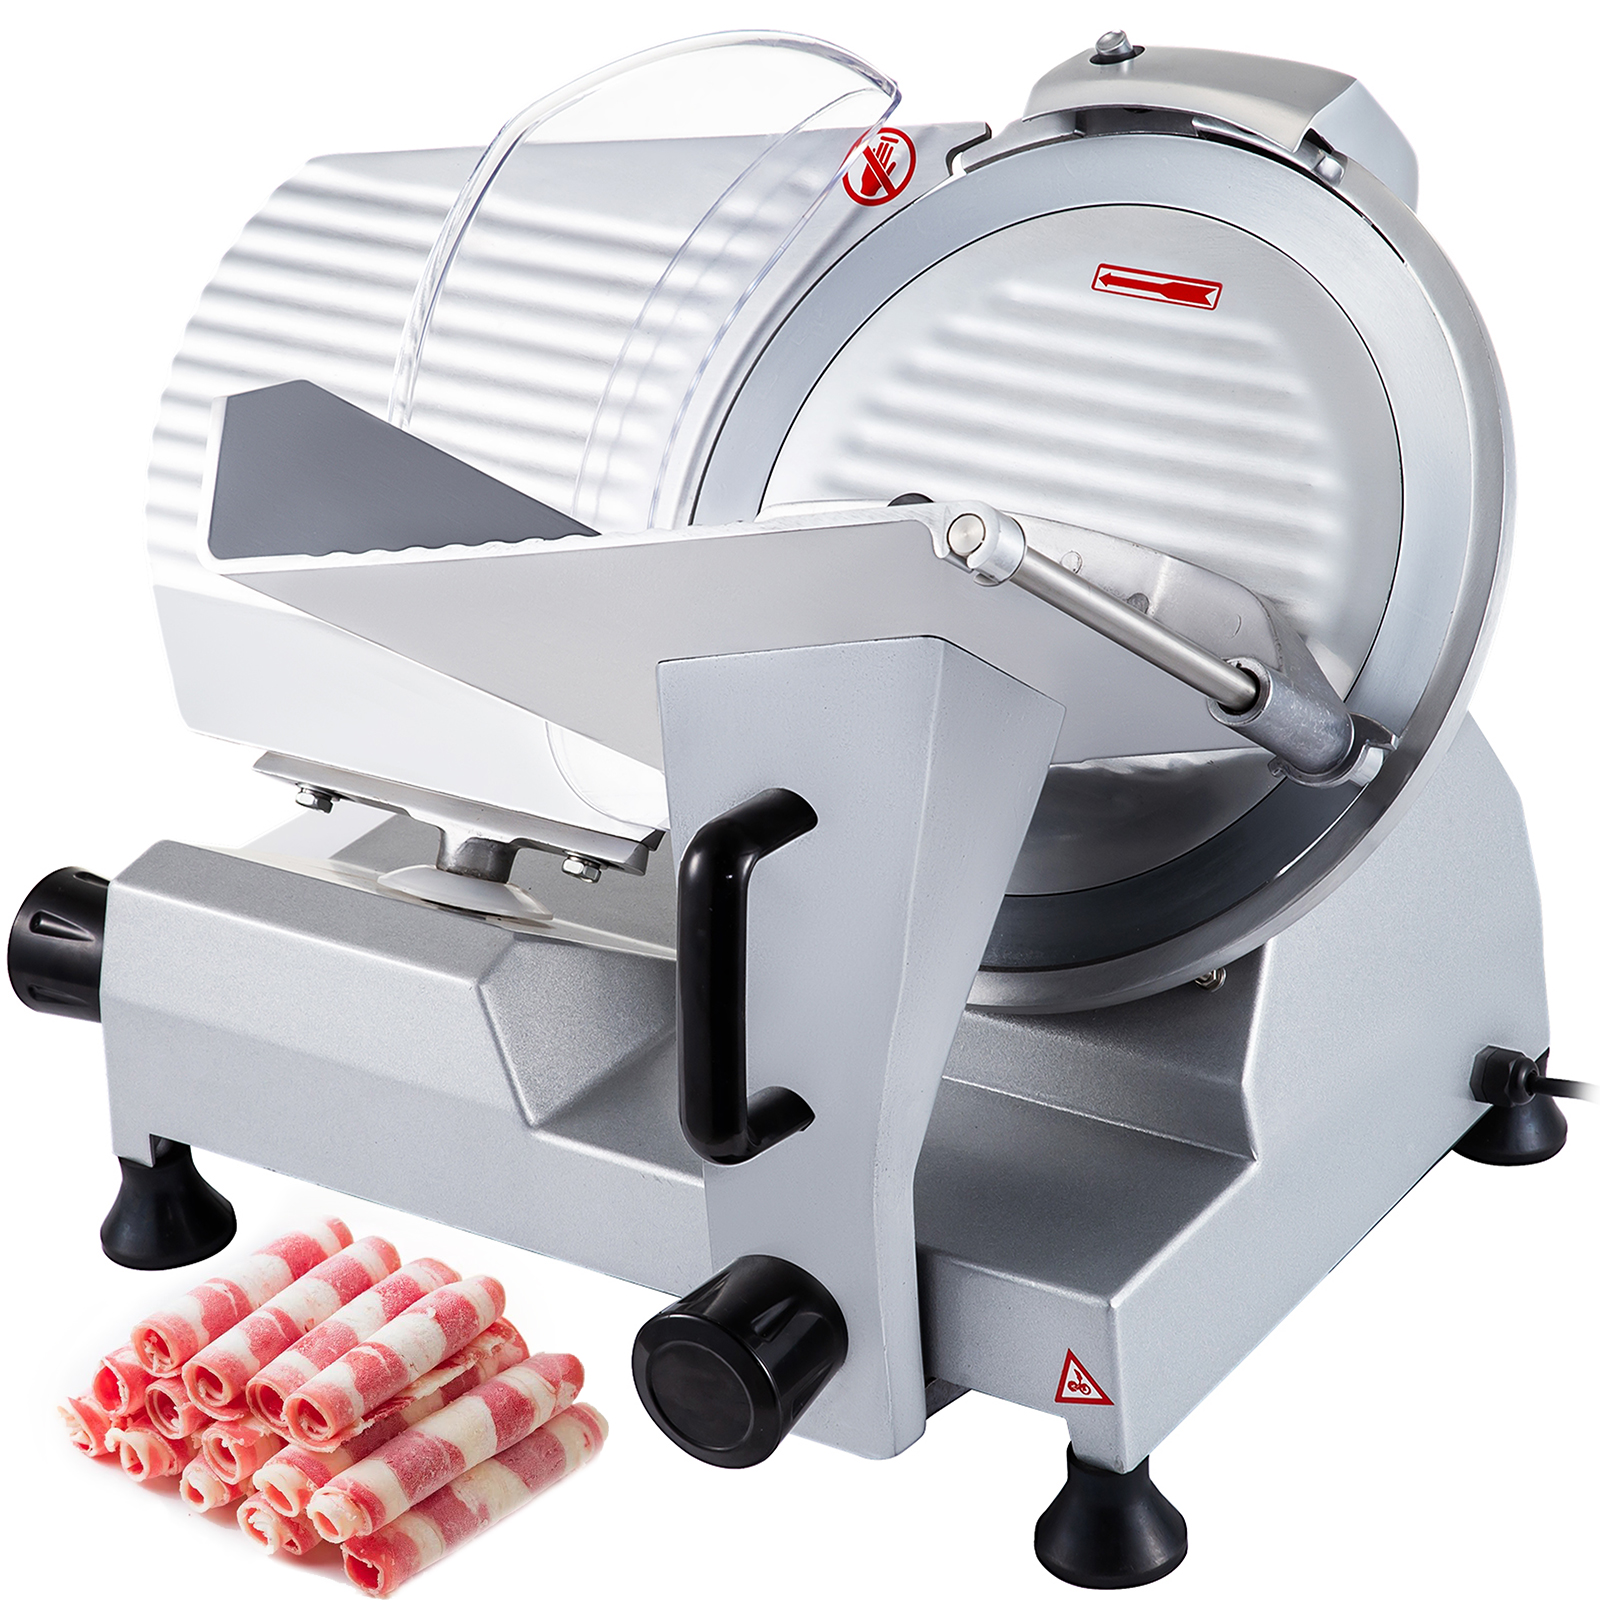 Having a Food Slicer at Home: 4 Advantages - Professional Series